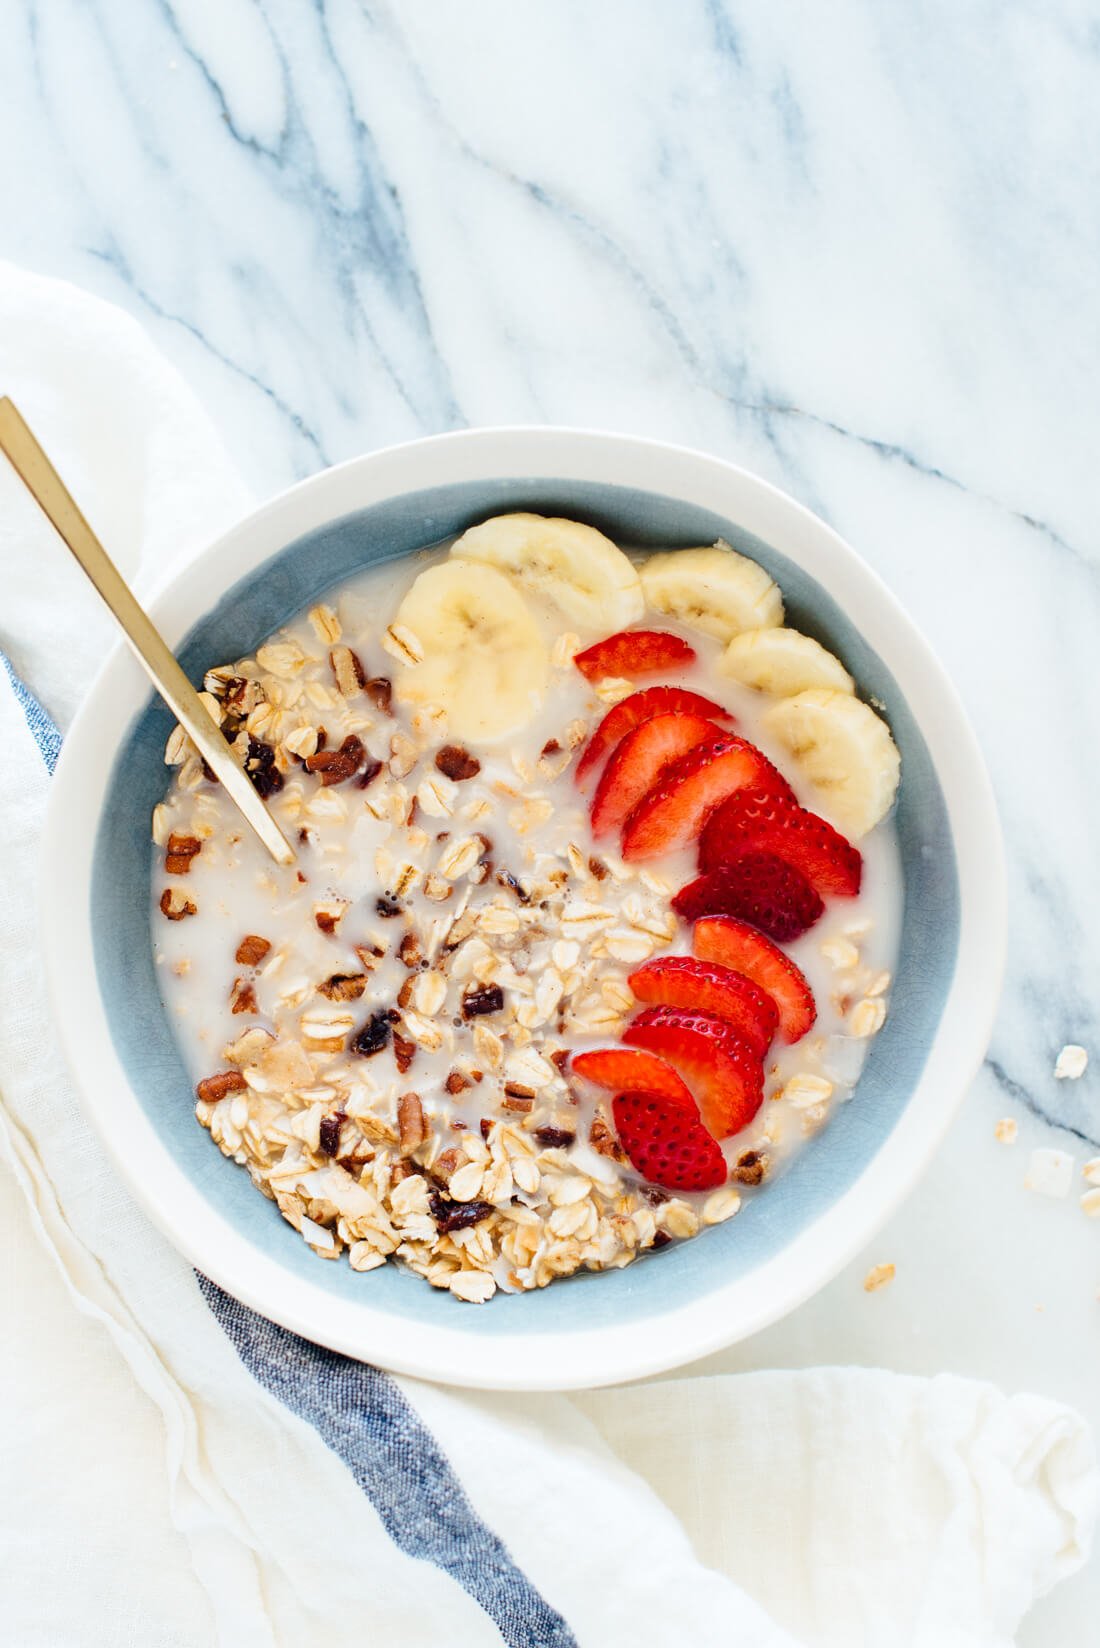 This cherry pecan muesli recipe will make you look forward to breakfast! It's made with old-fashioned oats, coconut, pecans and dried cherries, with a touch of maple syrup. cookieandkate.com